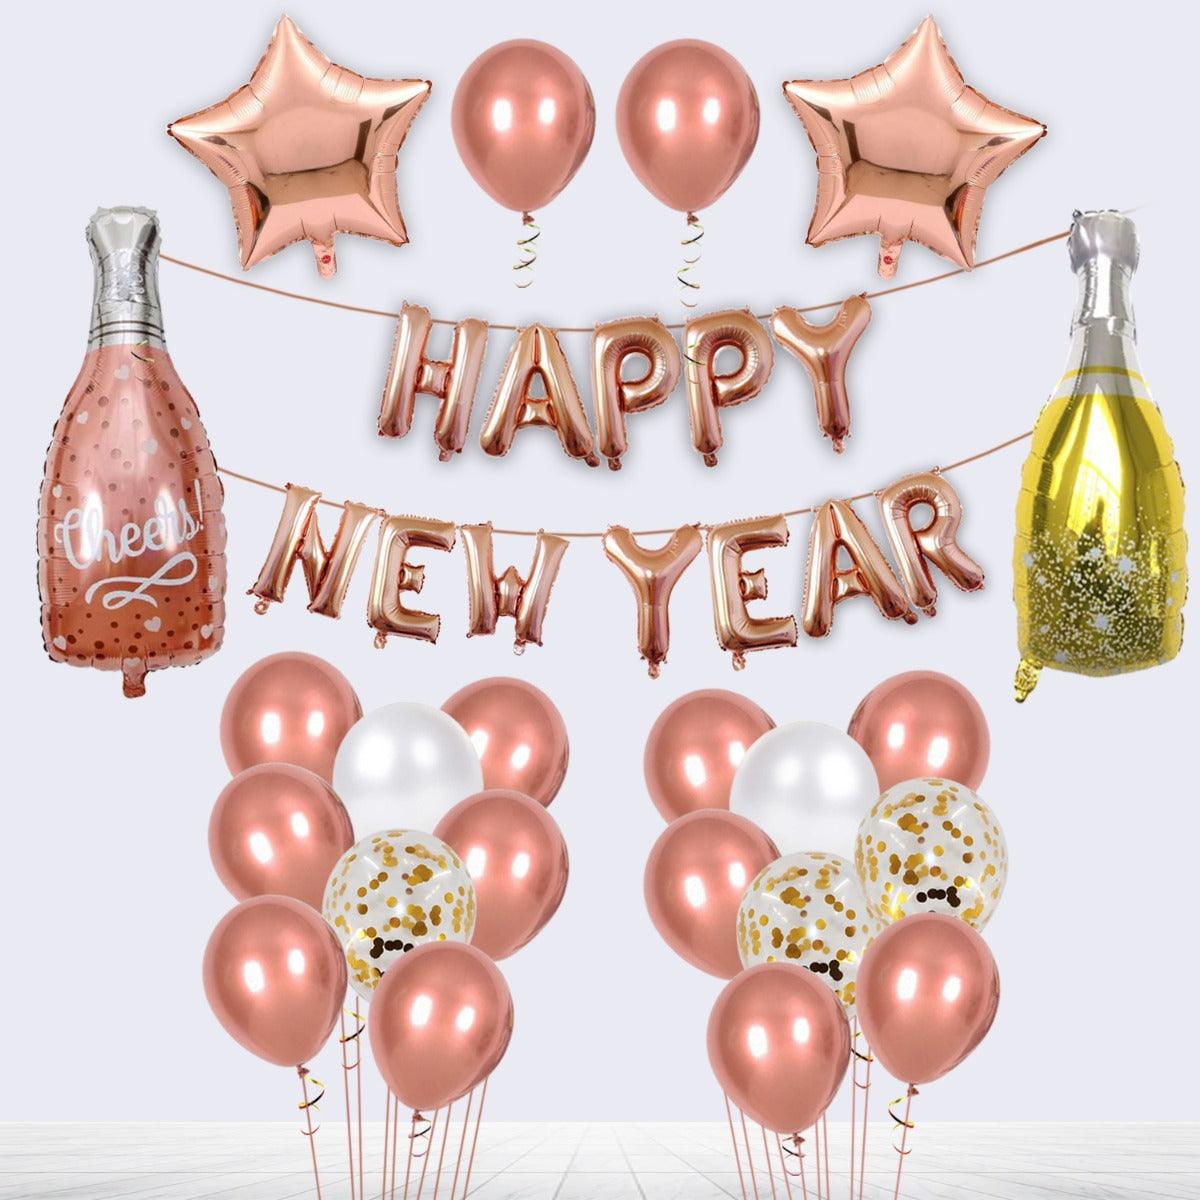 PartyCorp New Year Decoration Kit Combo 24 Pcs - Rose Gold, White, Confetti Chrome Balloon, Rose Gold HNY Foil Banner,(Rose Gold Star, Wine and Champagne Bottle) Foils